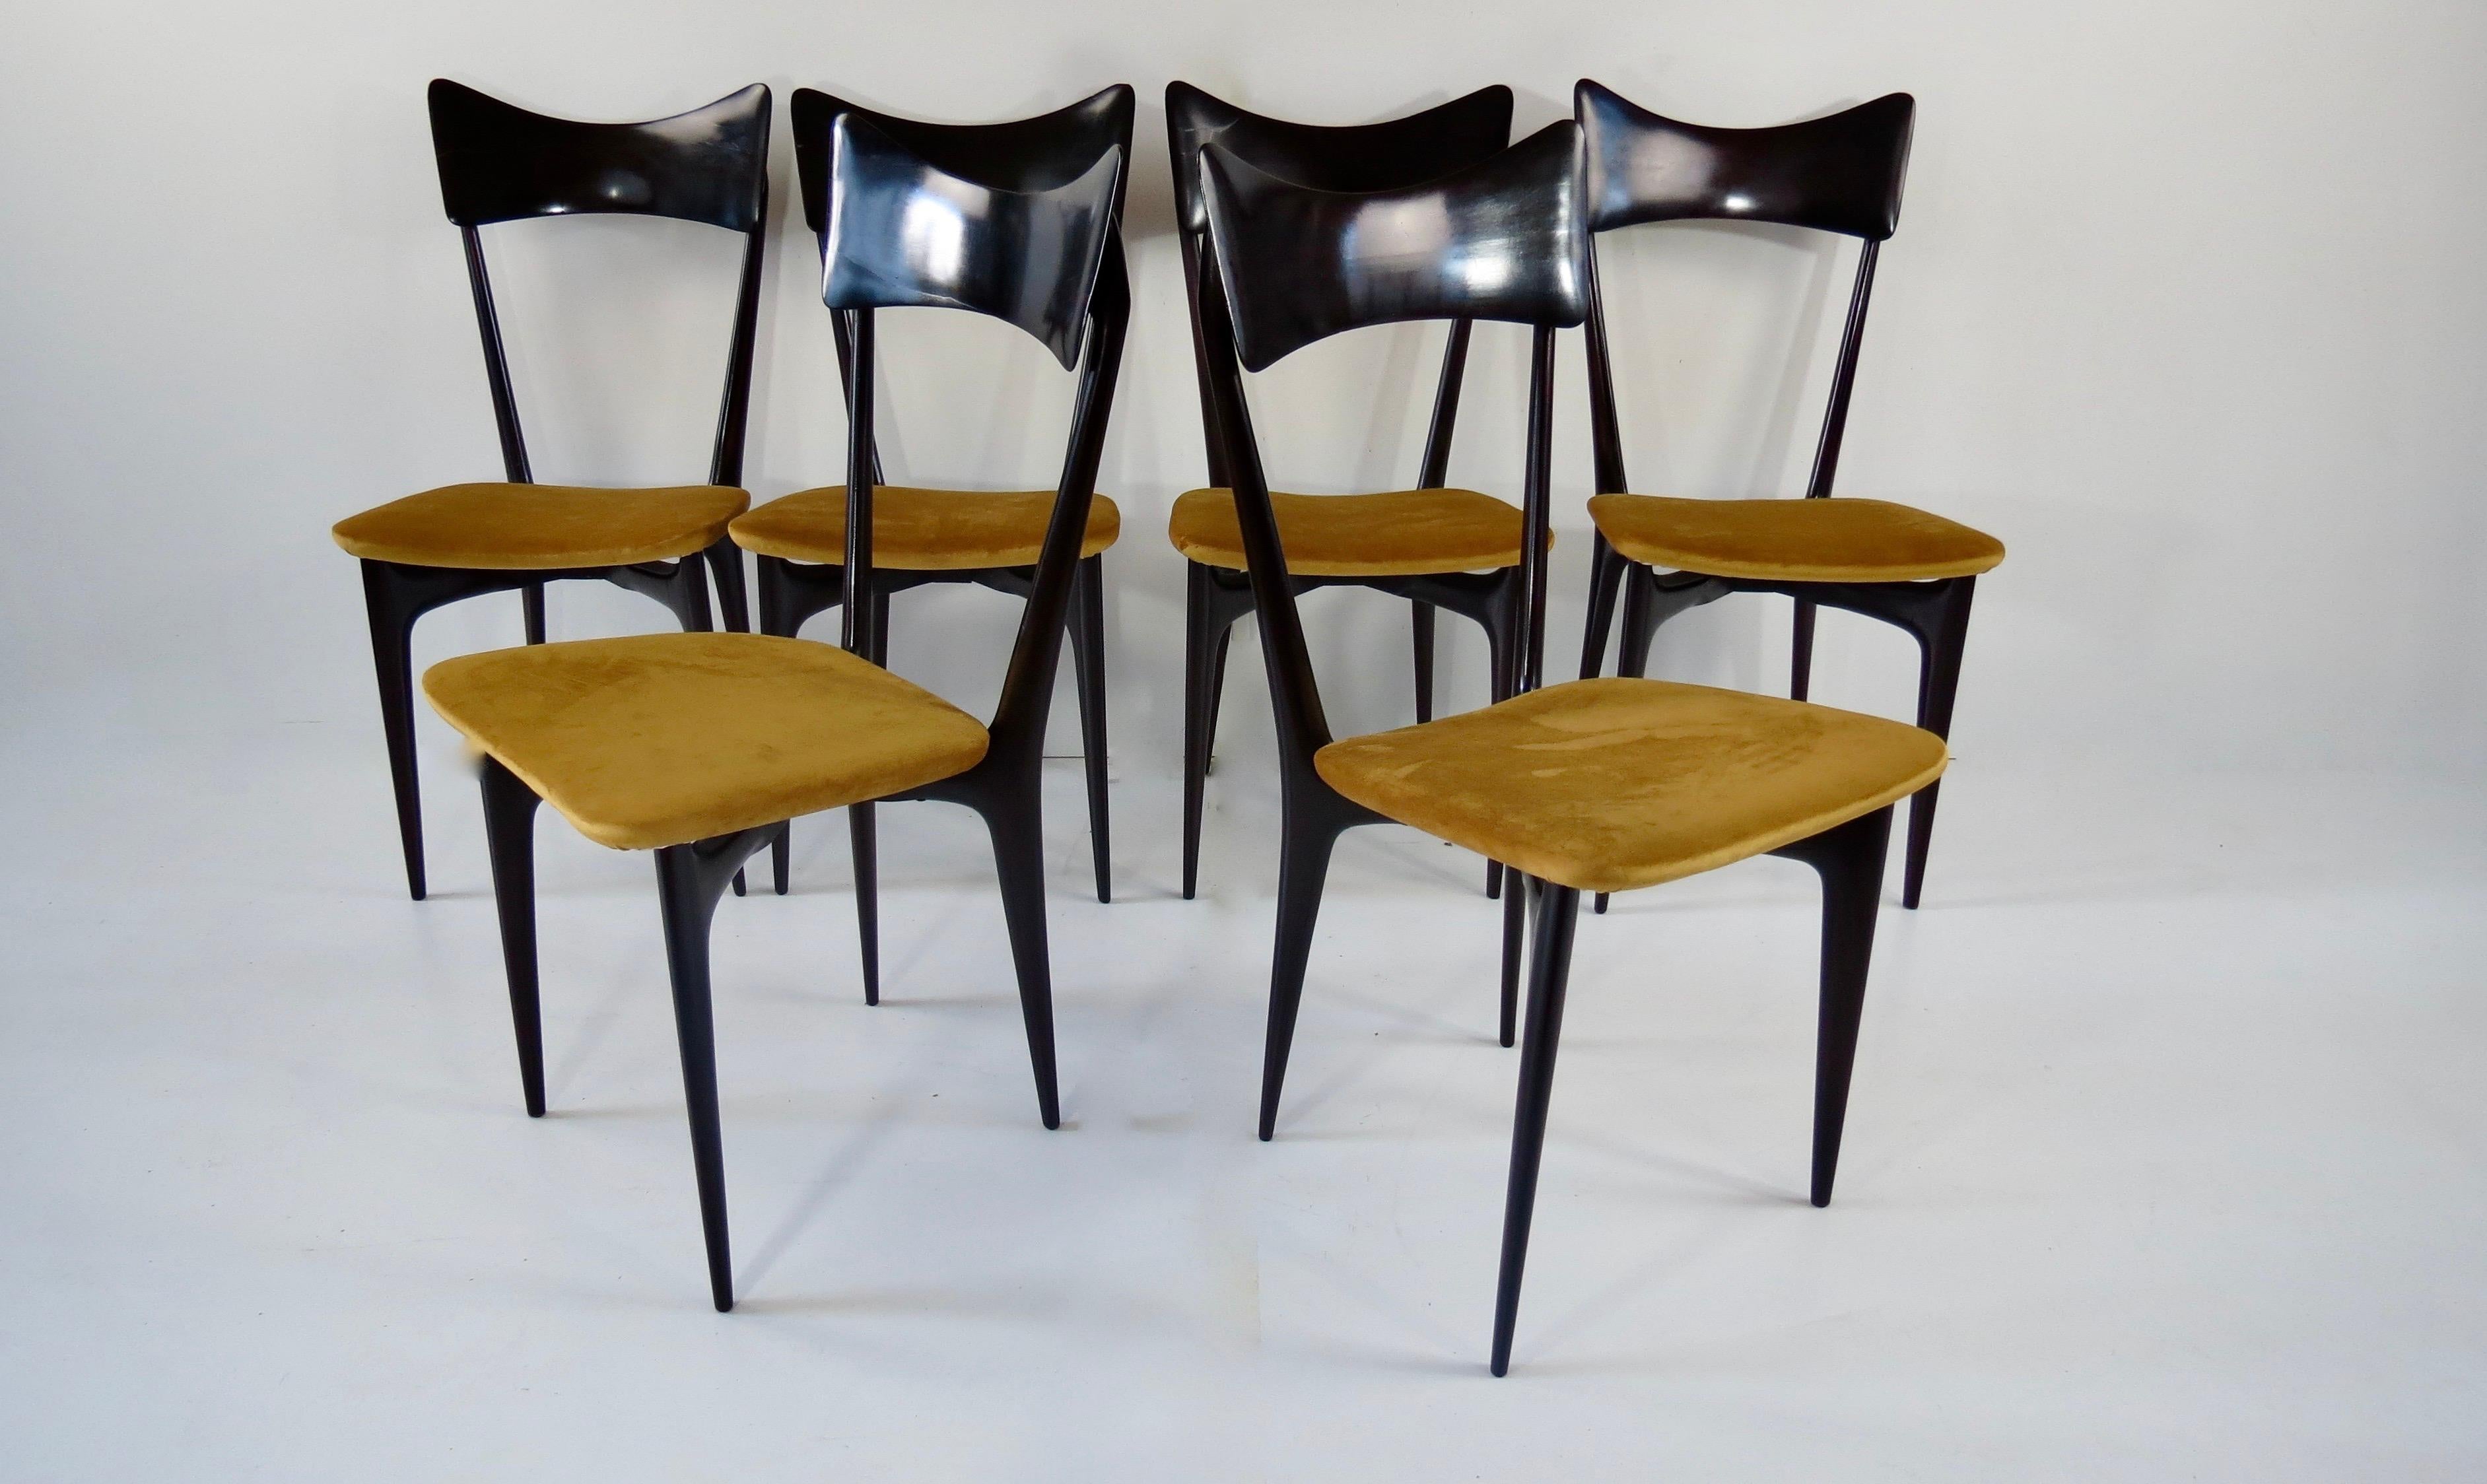 Set of iconic Ico & Luisa Parisi dining chairs
manufactured by Ariberto Colombo, Cantù, circa 1952
this version with a wooden backrest is a later version;
the original version is with a seat pad covered with red synthetic leather then